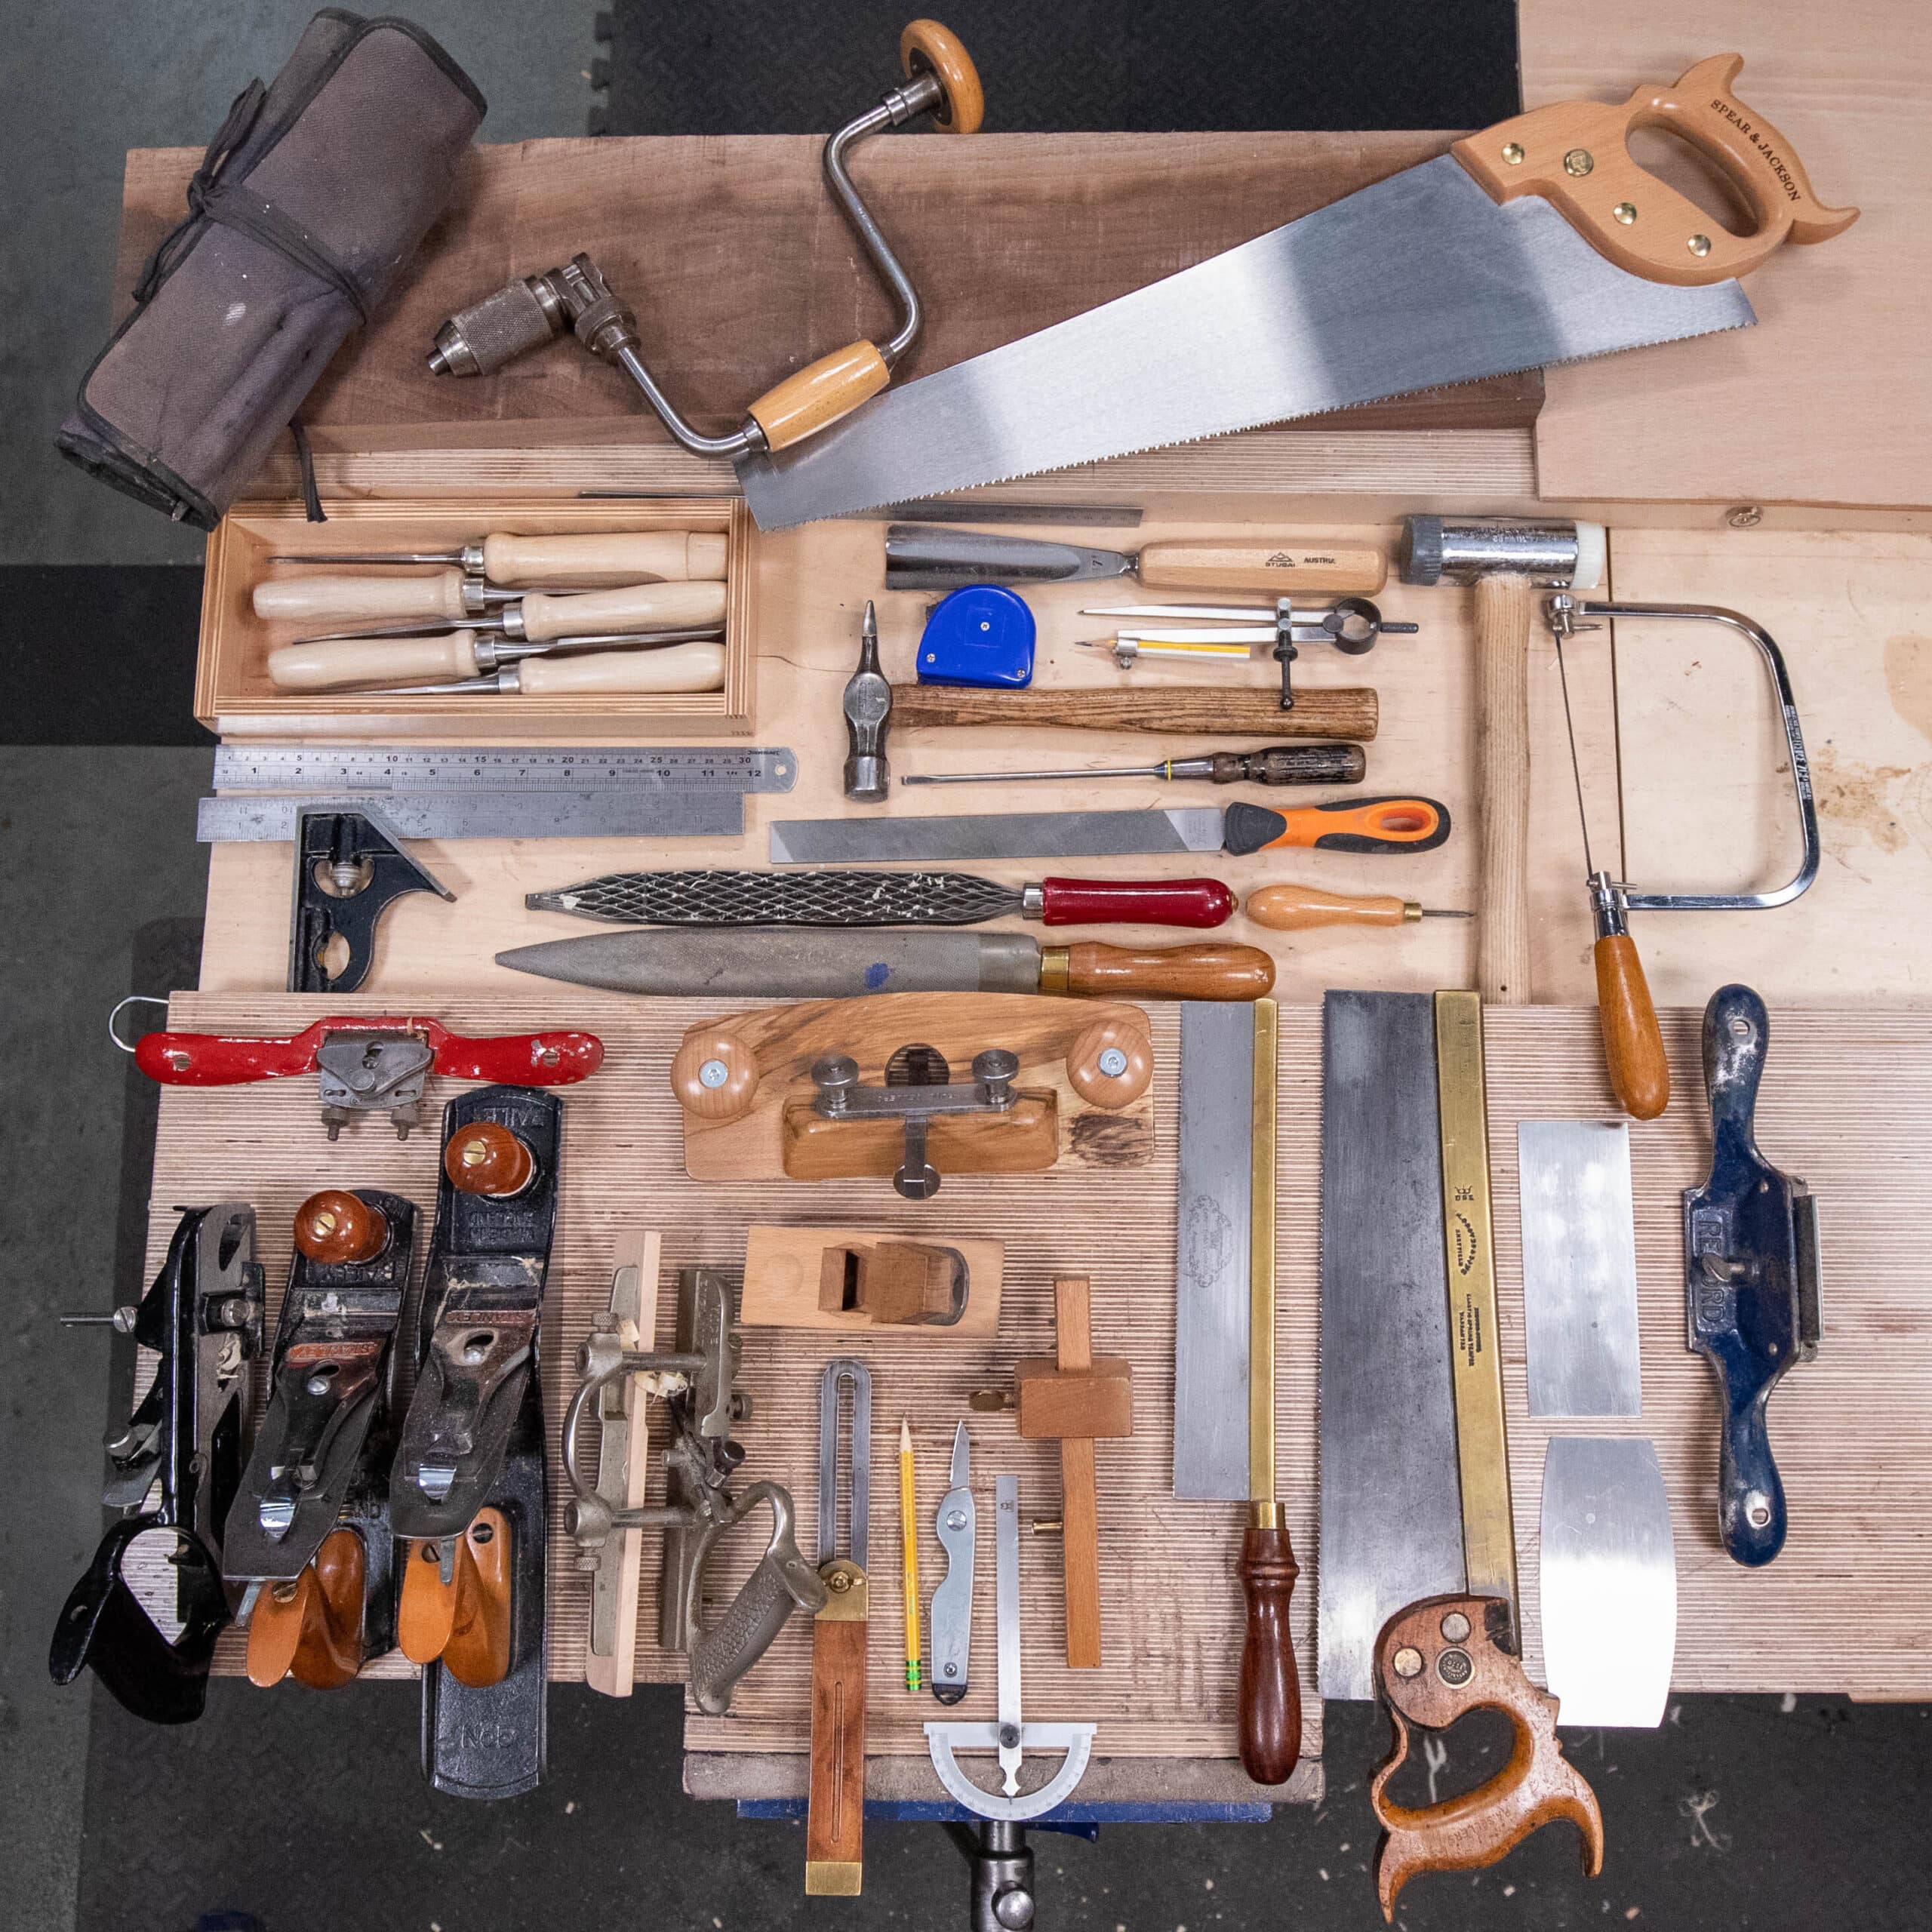 30 Must-Have Crafting Tools and Supplies - Positively Splendid